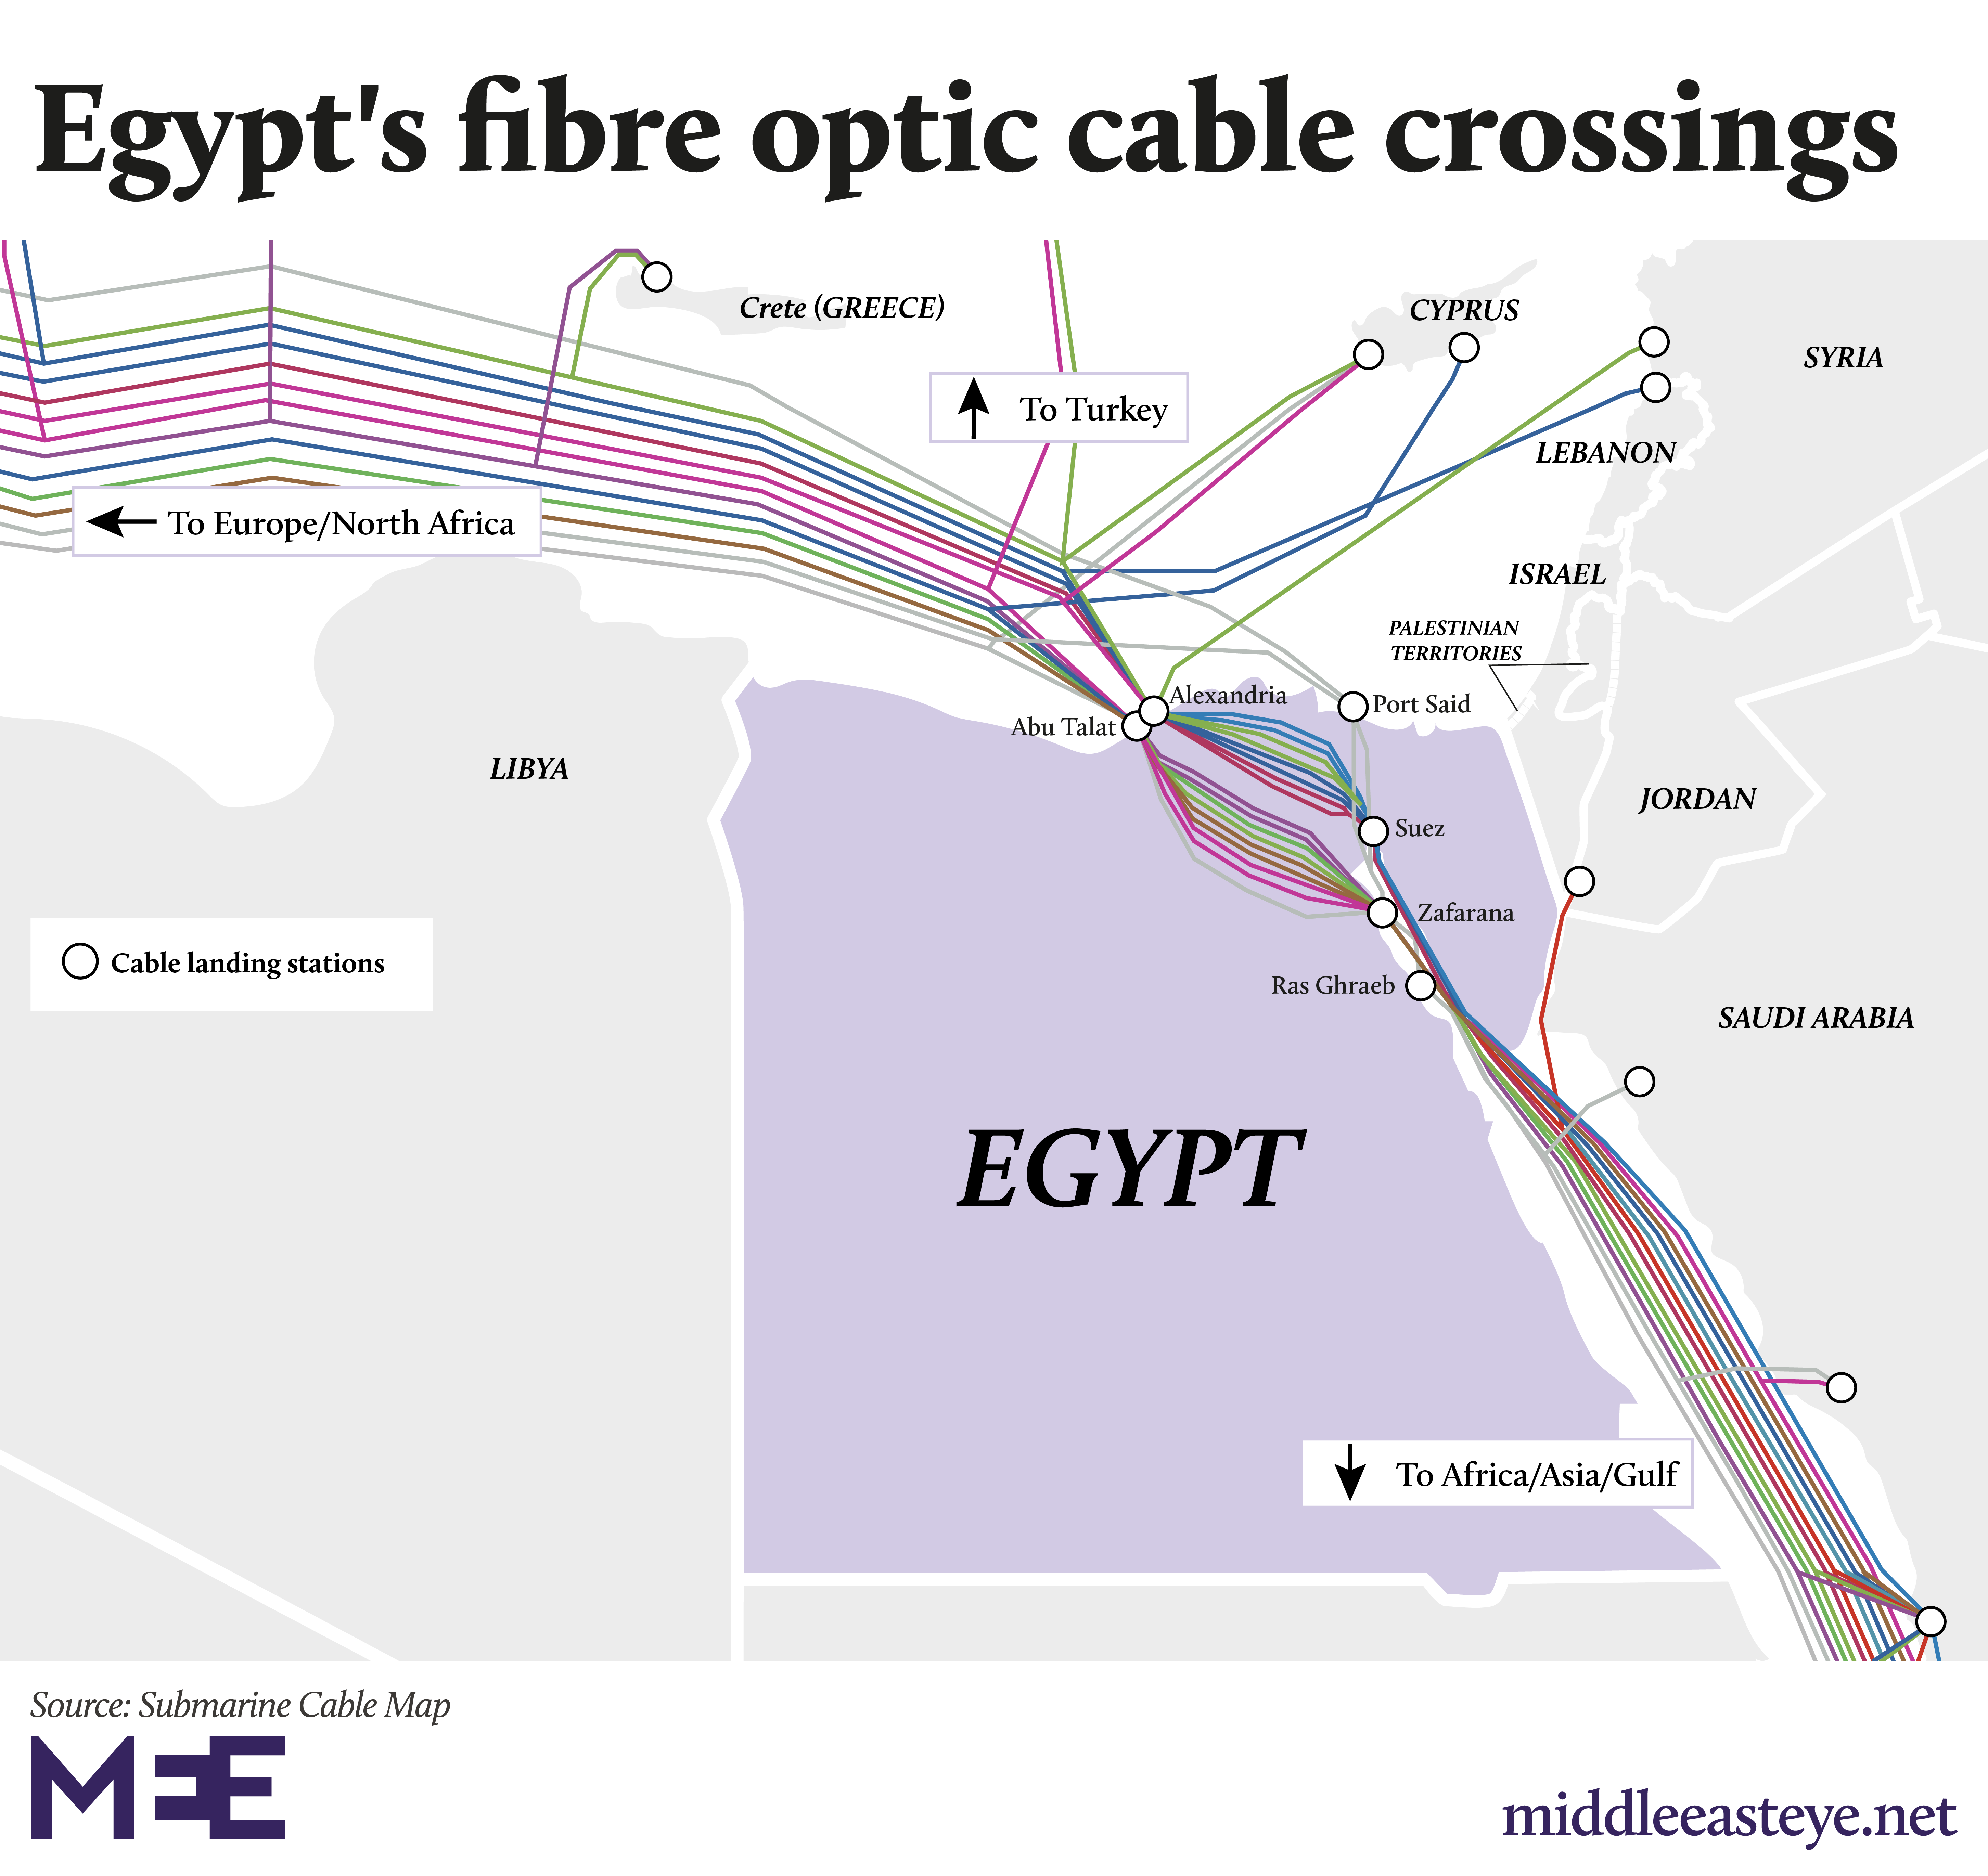 Egyptian cable connections